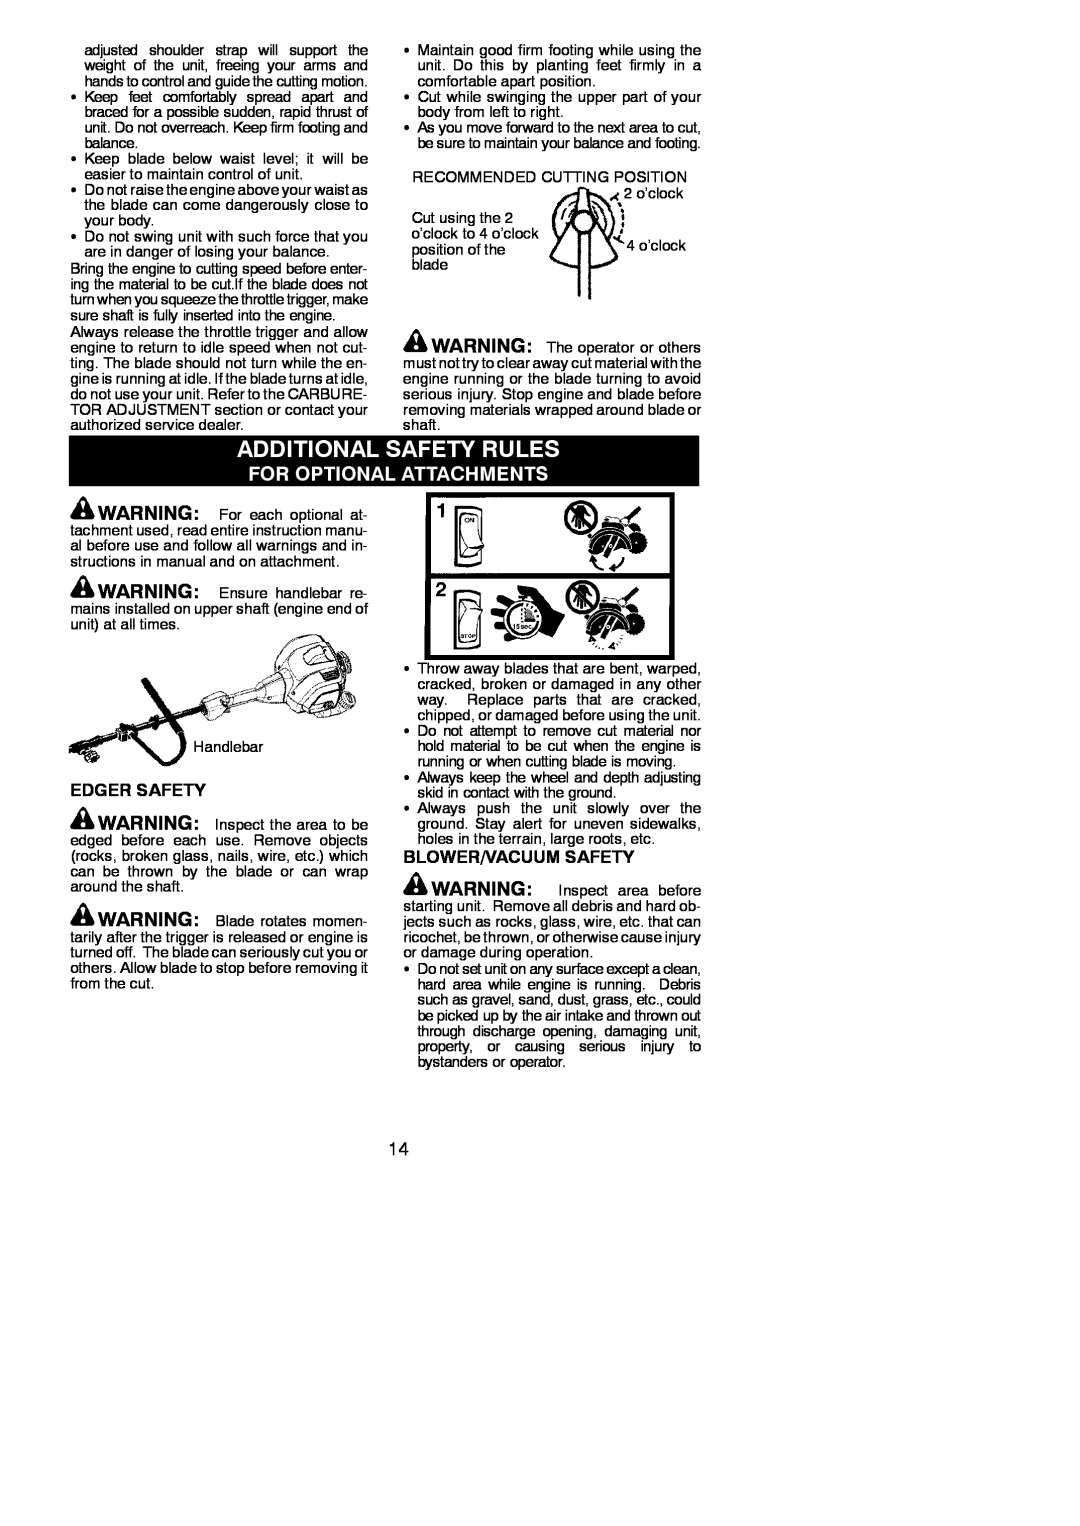 Poulan 545186843 instruction manual Additional Safety Rules, For Optional Attachments, Edger Safety, Blower/Vacuum Safety 